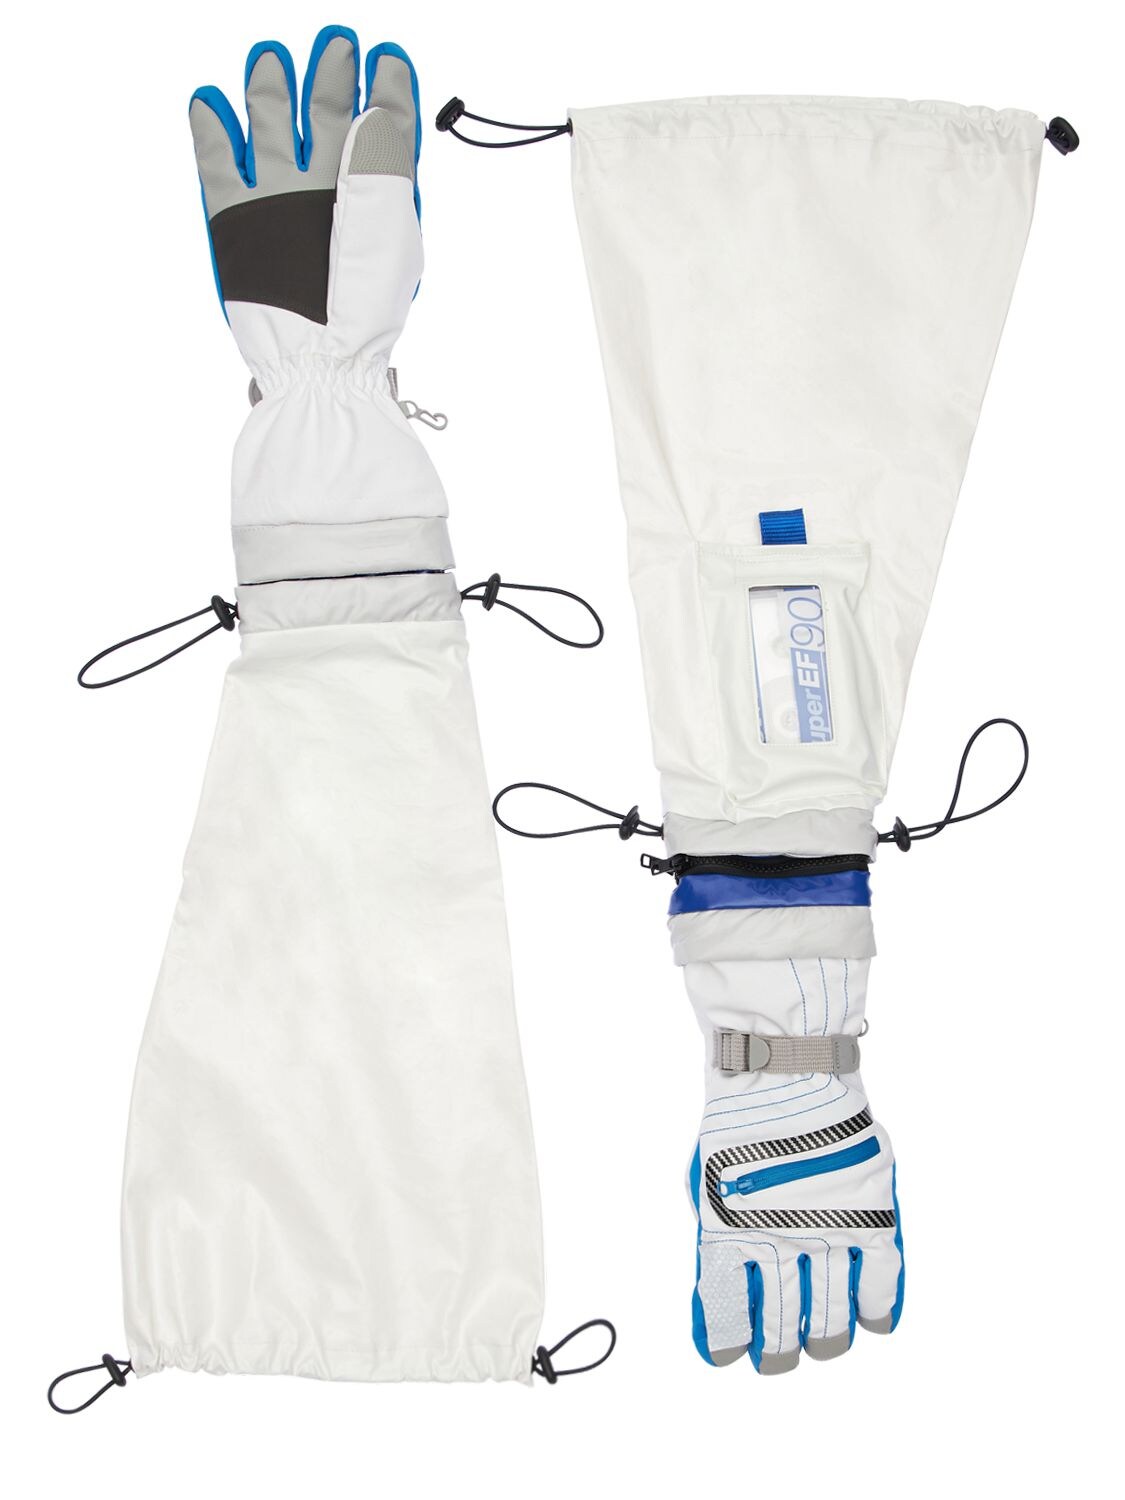 Tdt - Tourne De Transmission Frequency Gloves In White